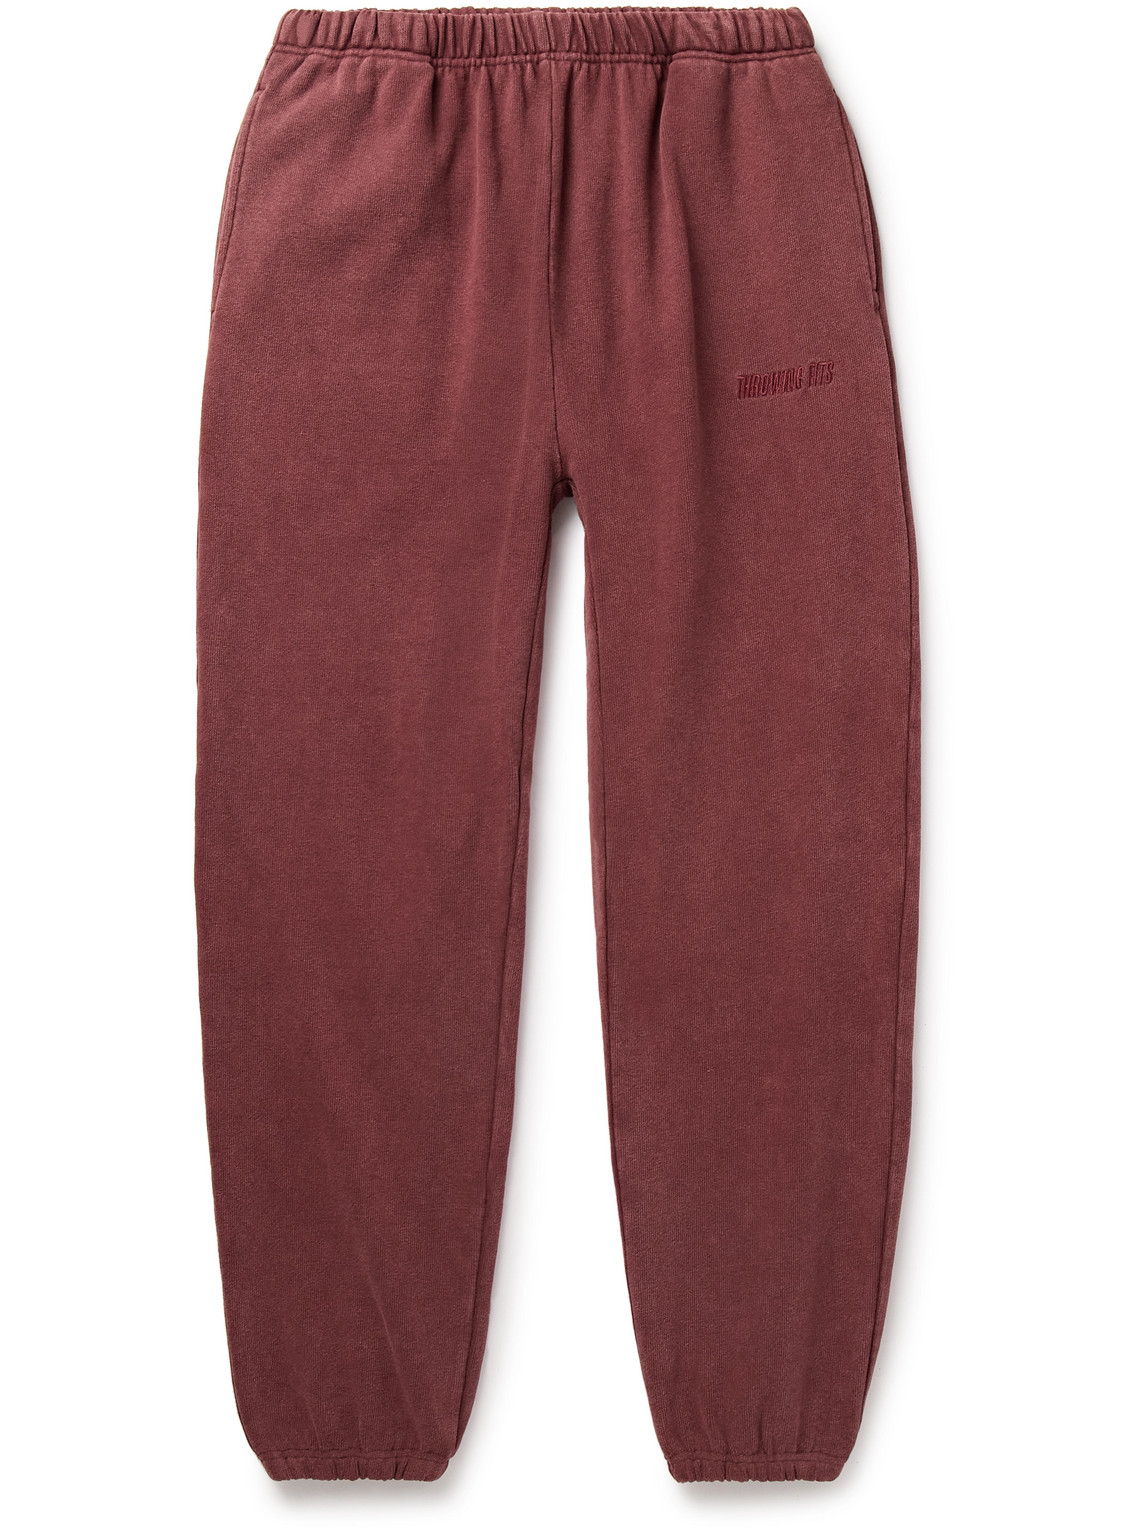 Throwing Fits - Tapered Logo-Embroidered Cotton-Jersey Sweatpants - Men - Burgundy - S von Throwing Fits